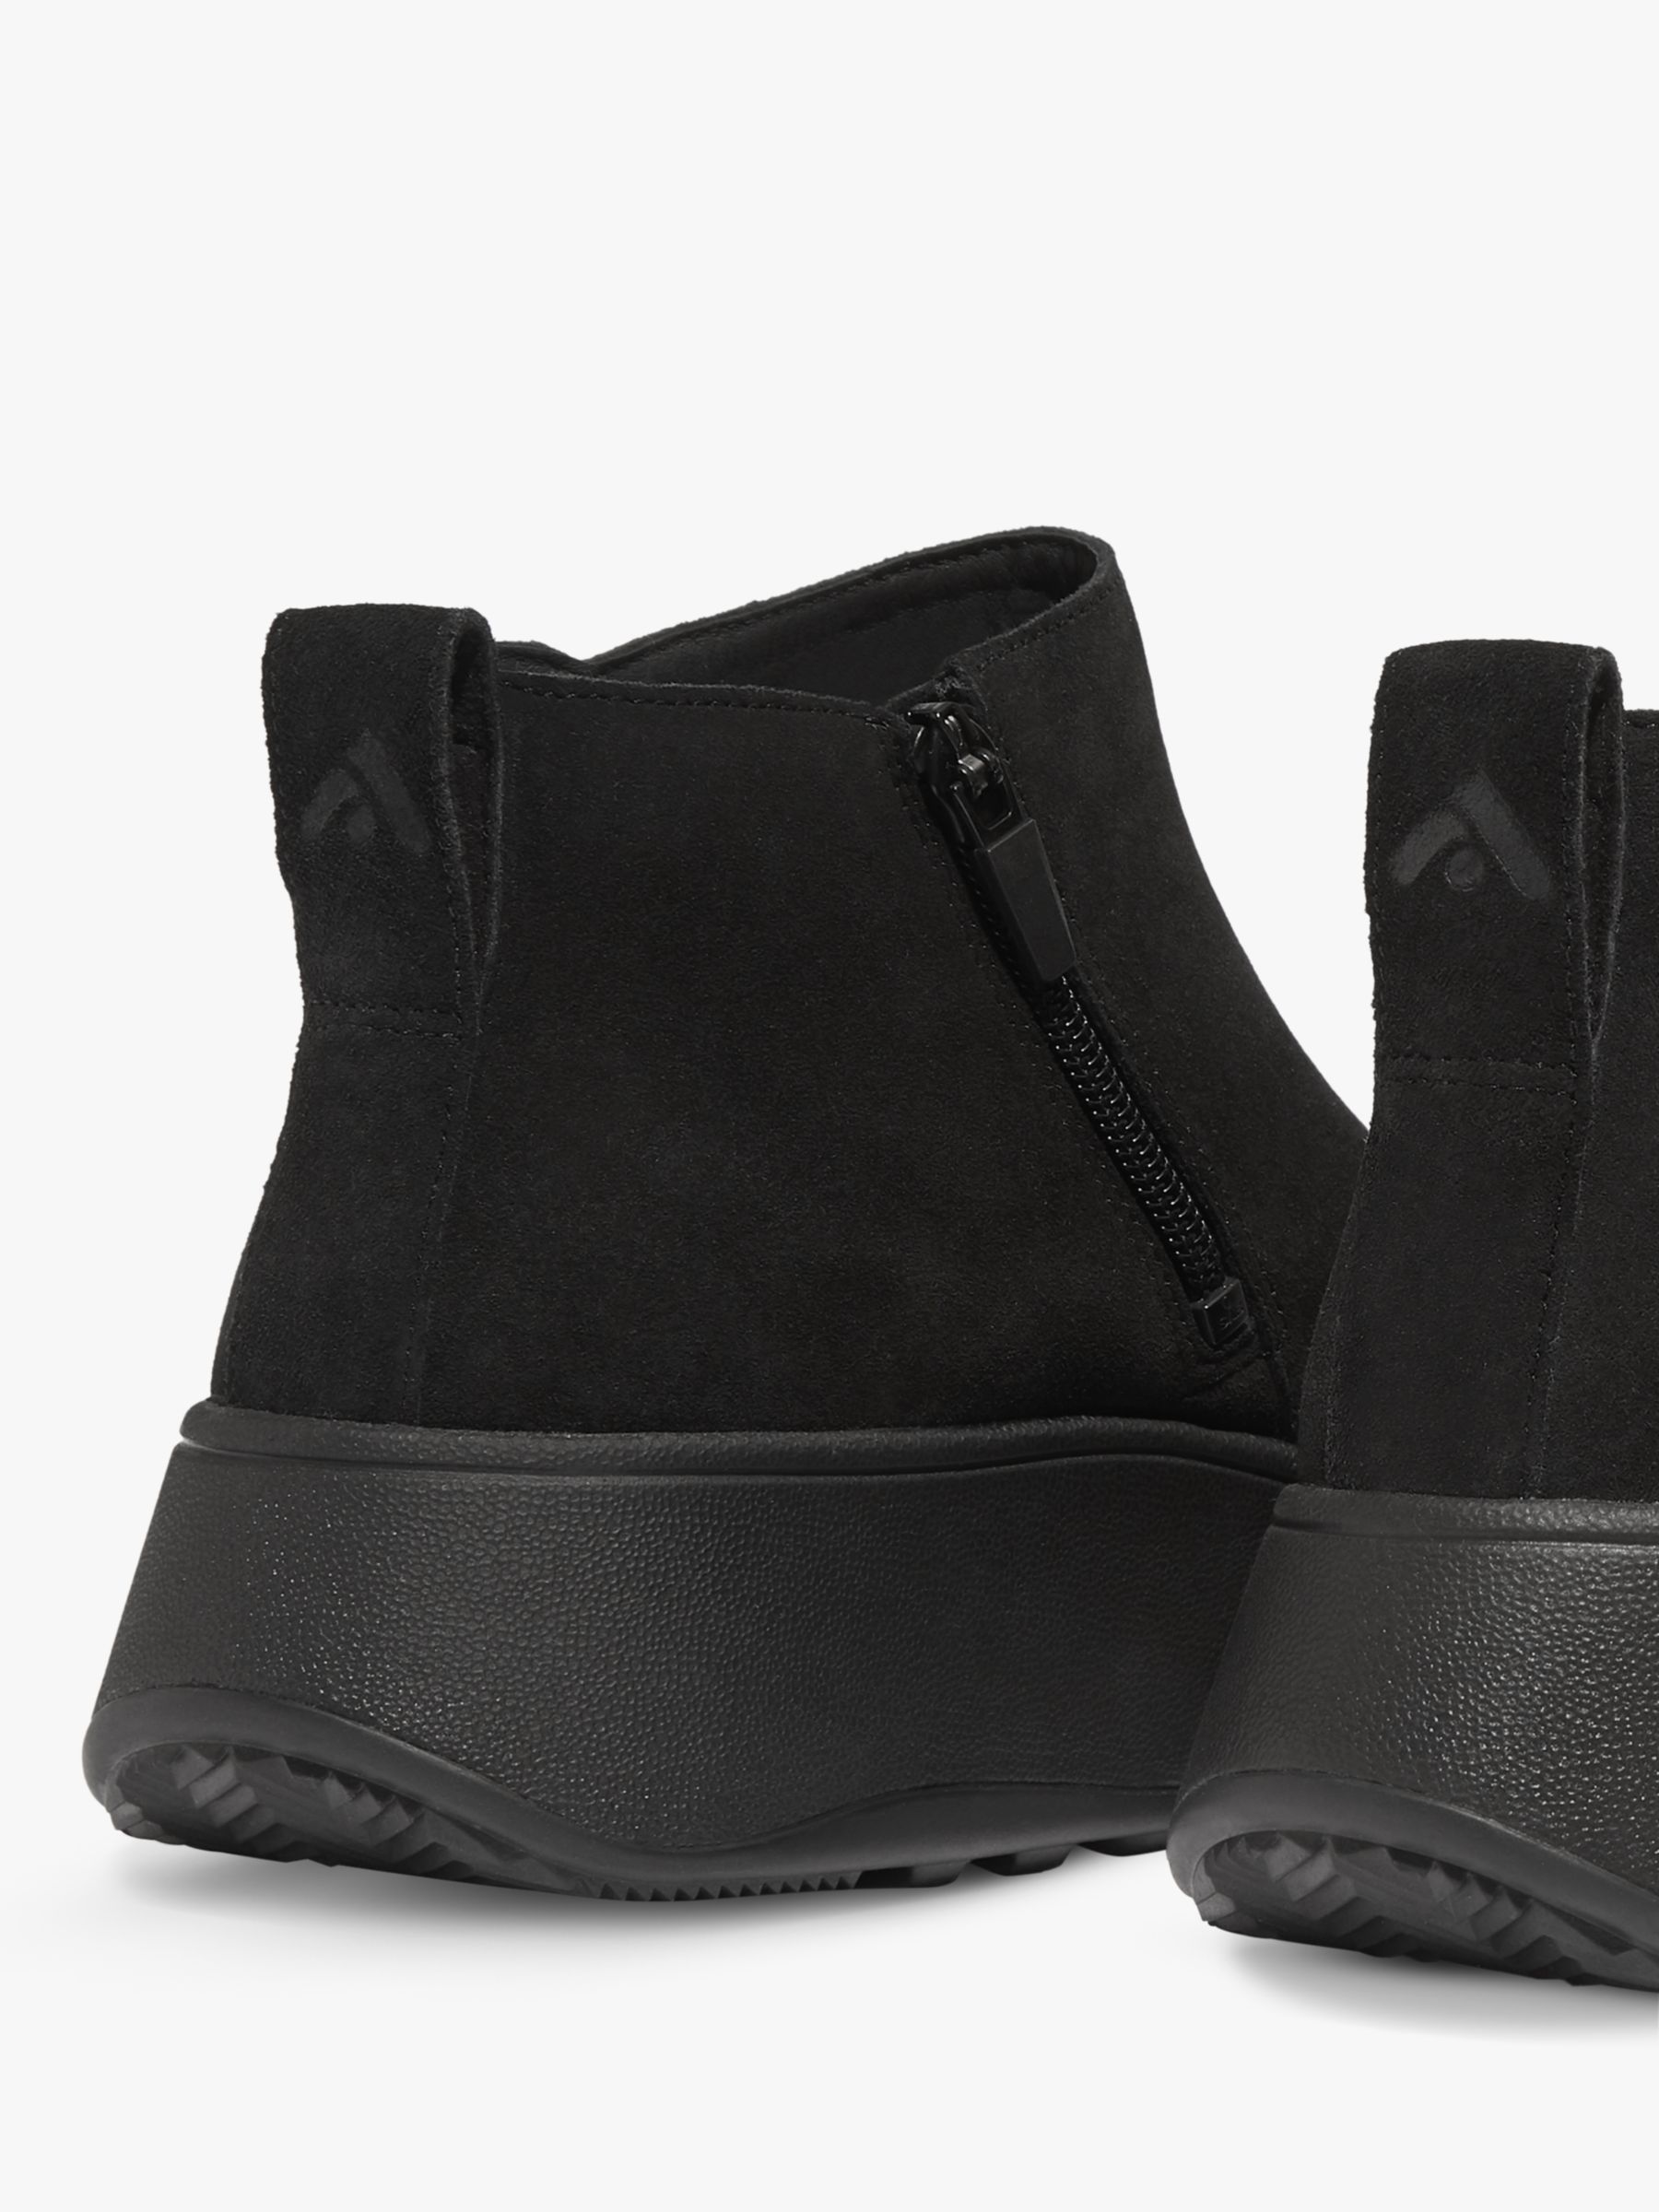 Buy FitFlop Suede Flatform Ankle Boots Online at johnlewis.com